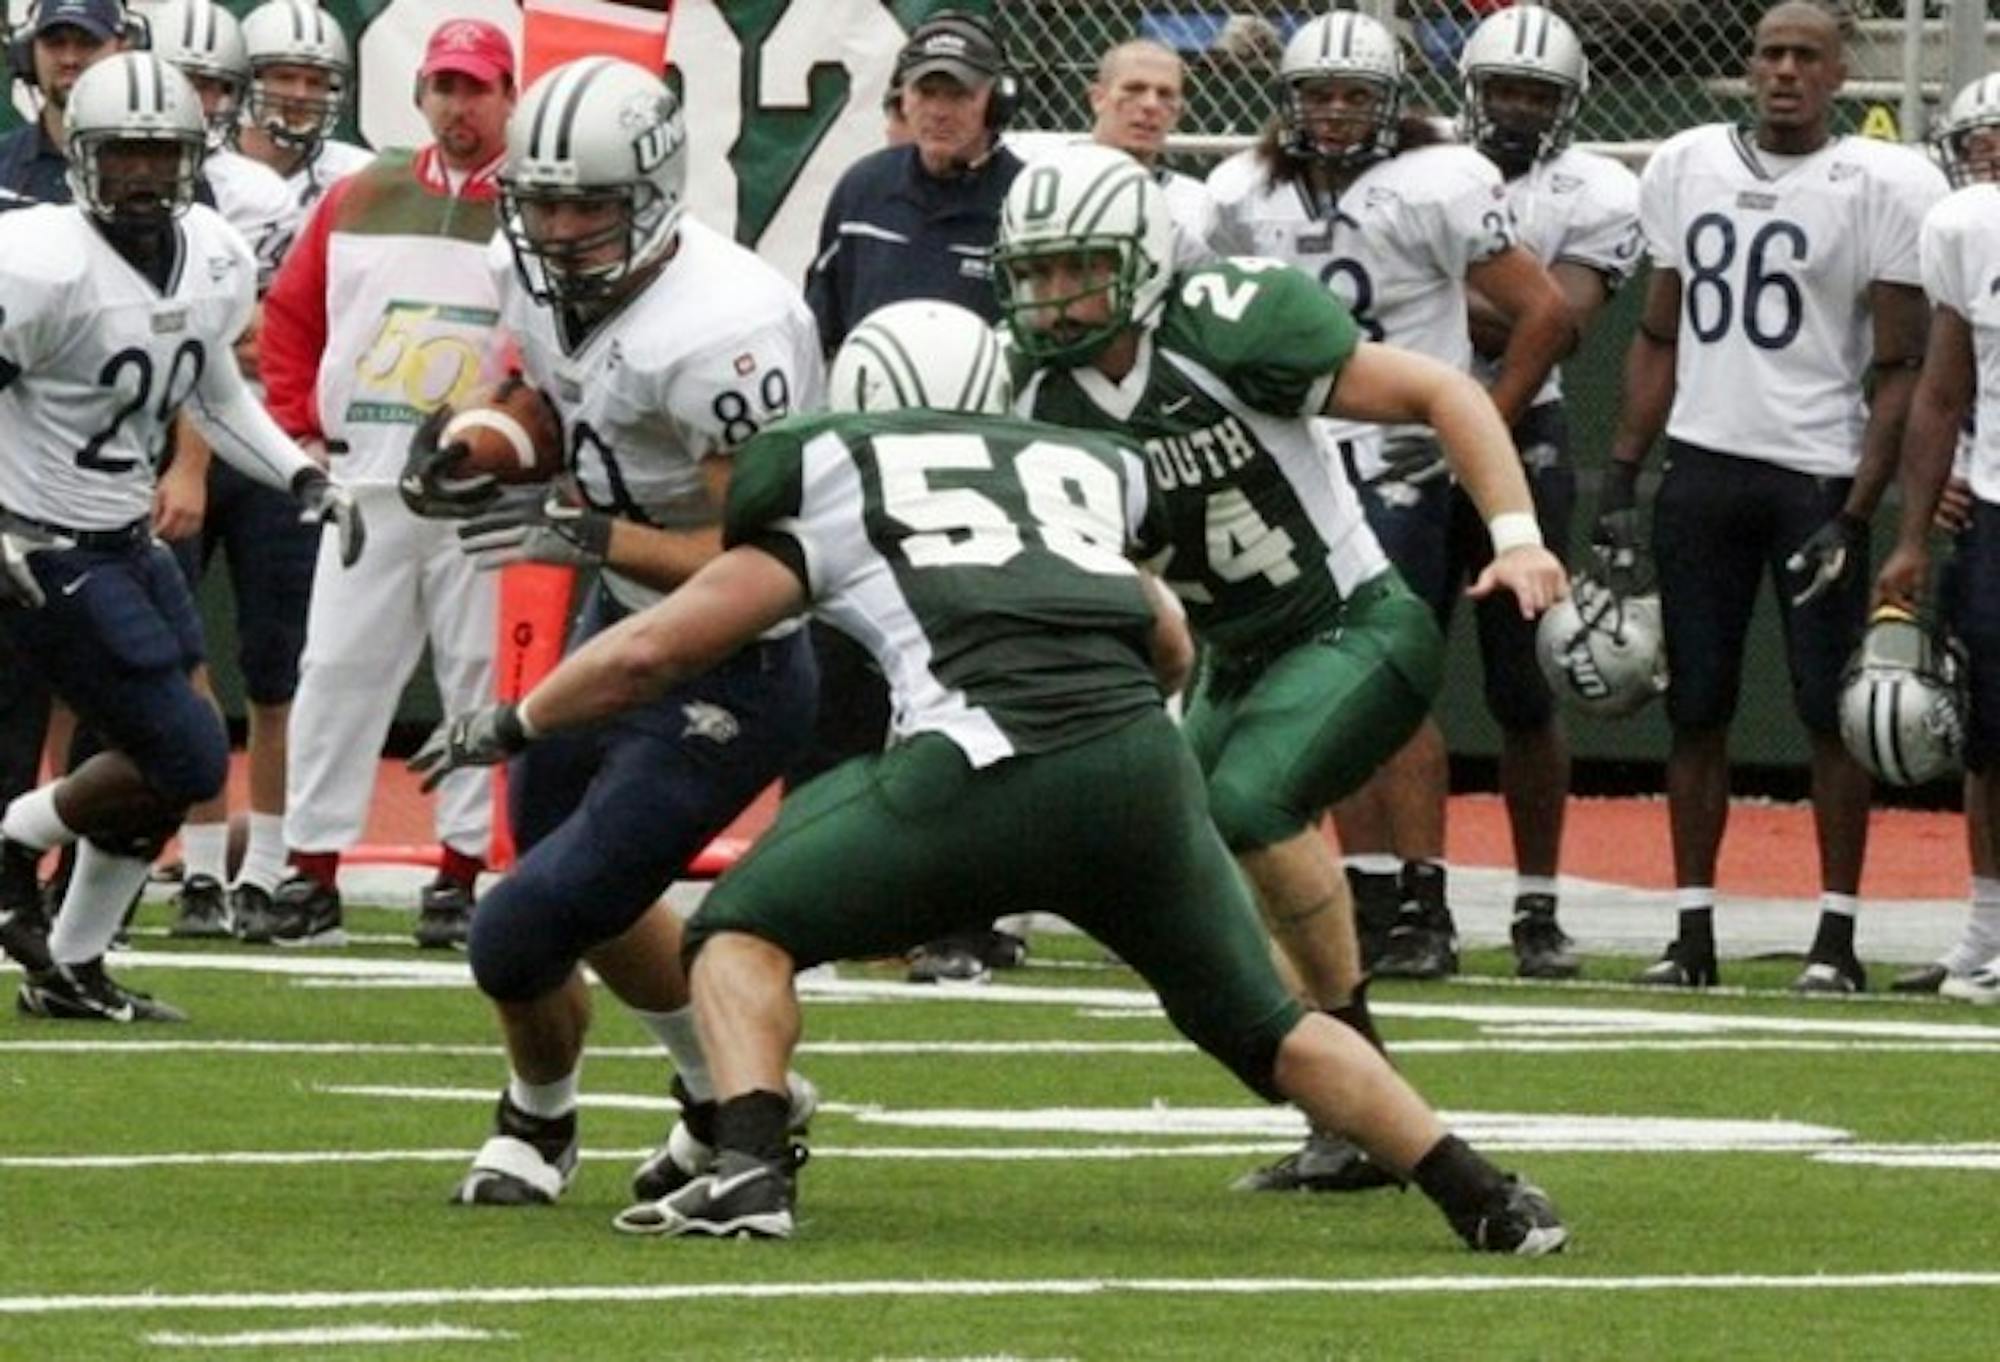 Dartmouth struggled to contain the UNH offense all afternoon on Saturday, falling to the No. 1 team in I-AA 56-14.